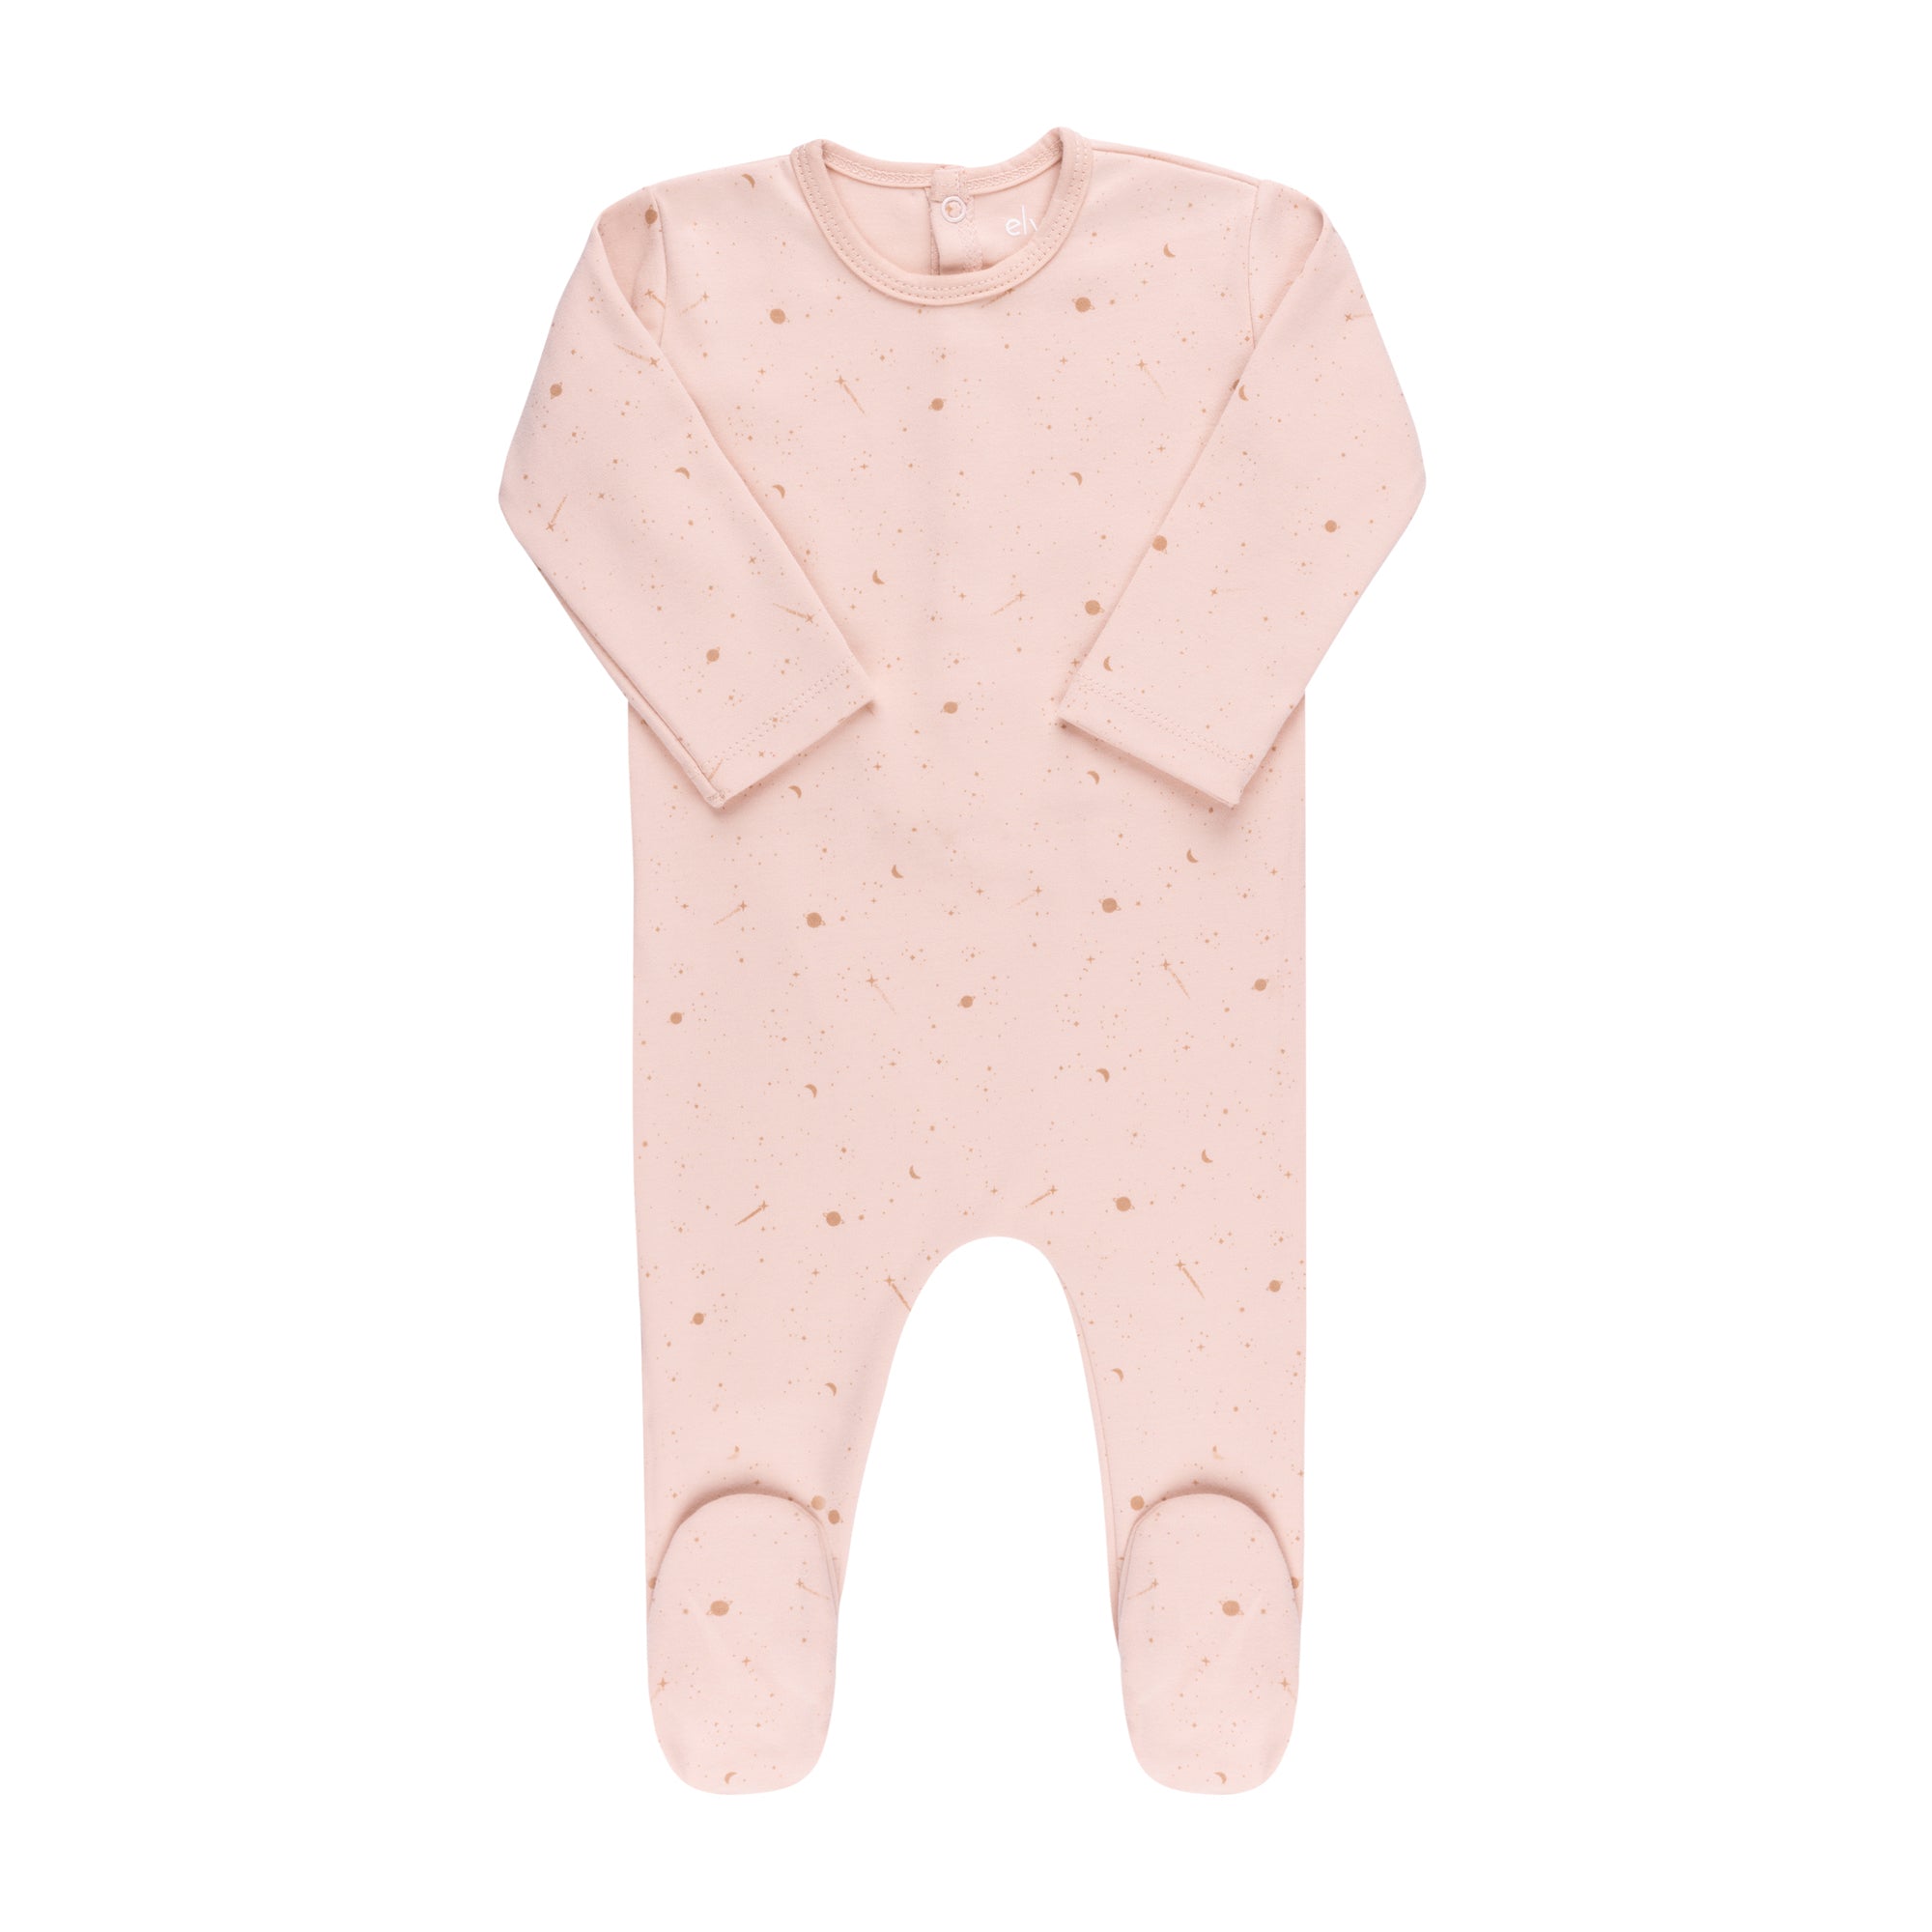 Ely’s & Co Brushed Cotton Celestial Footie- Pink